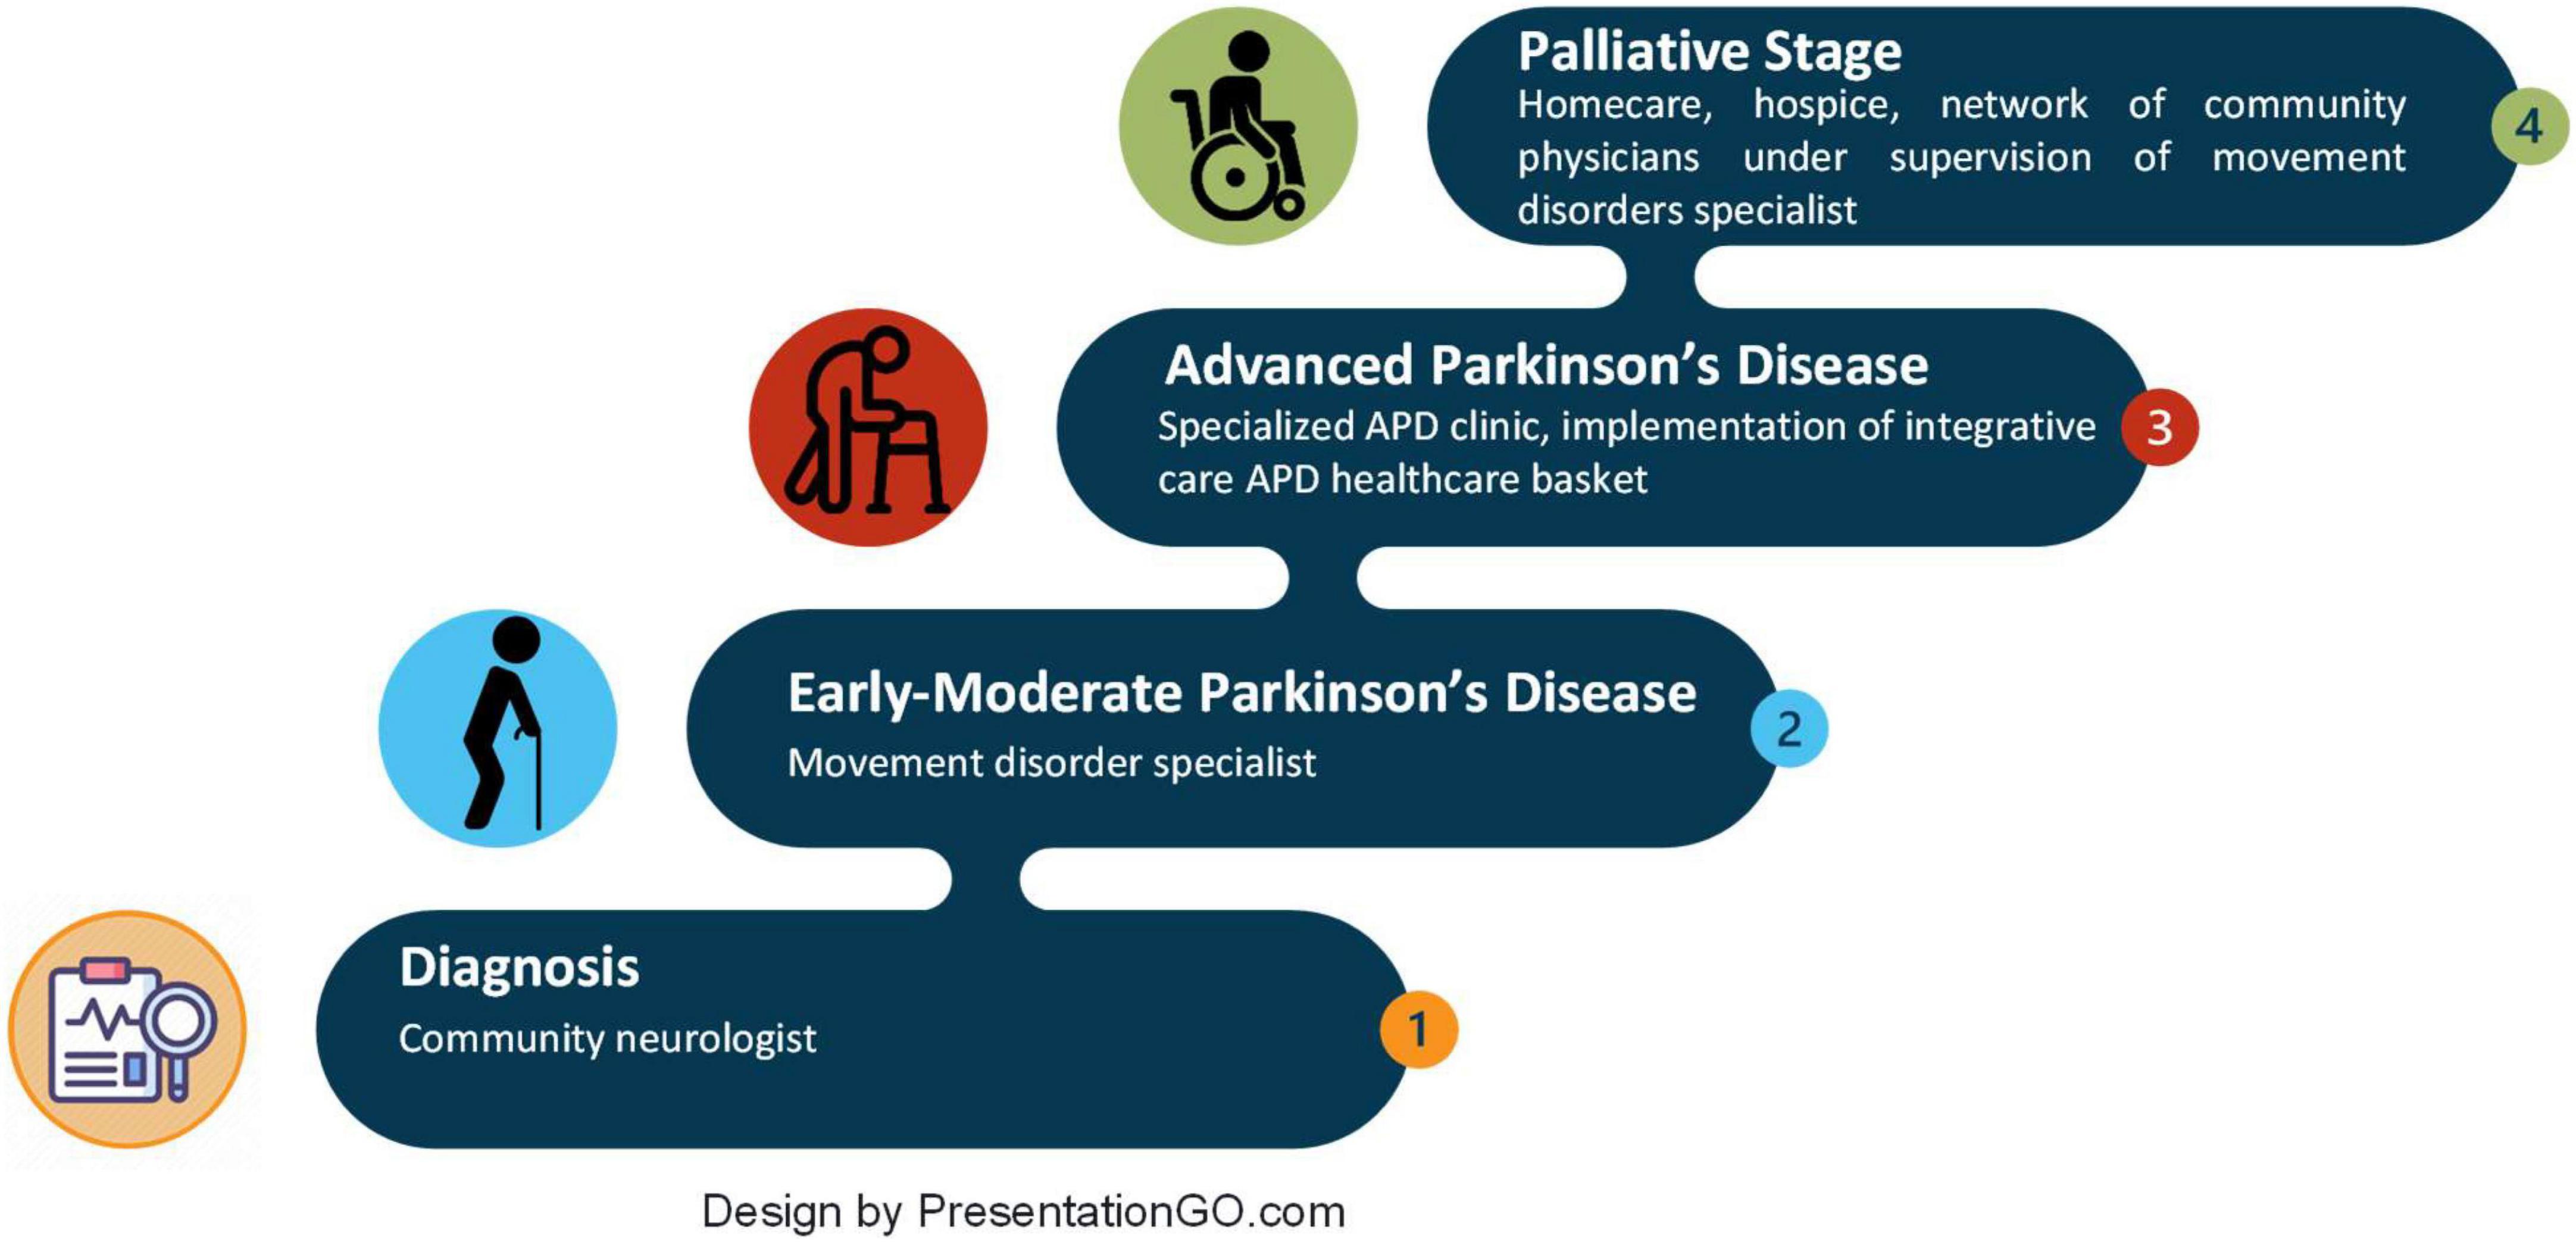 Frontiers Management of advanced Parkinson’s disease in Israel